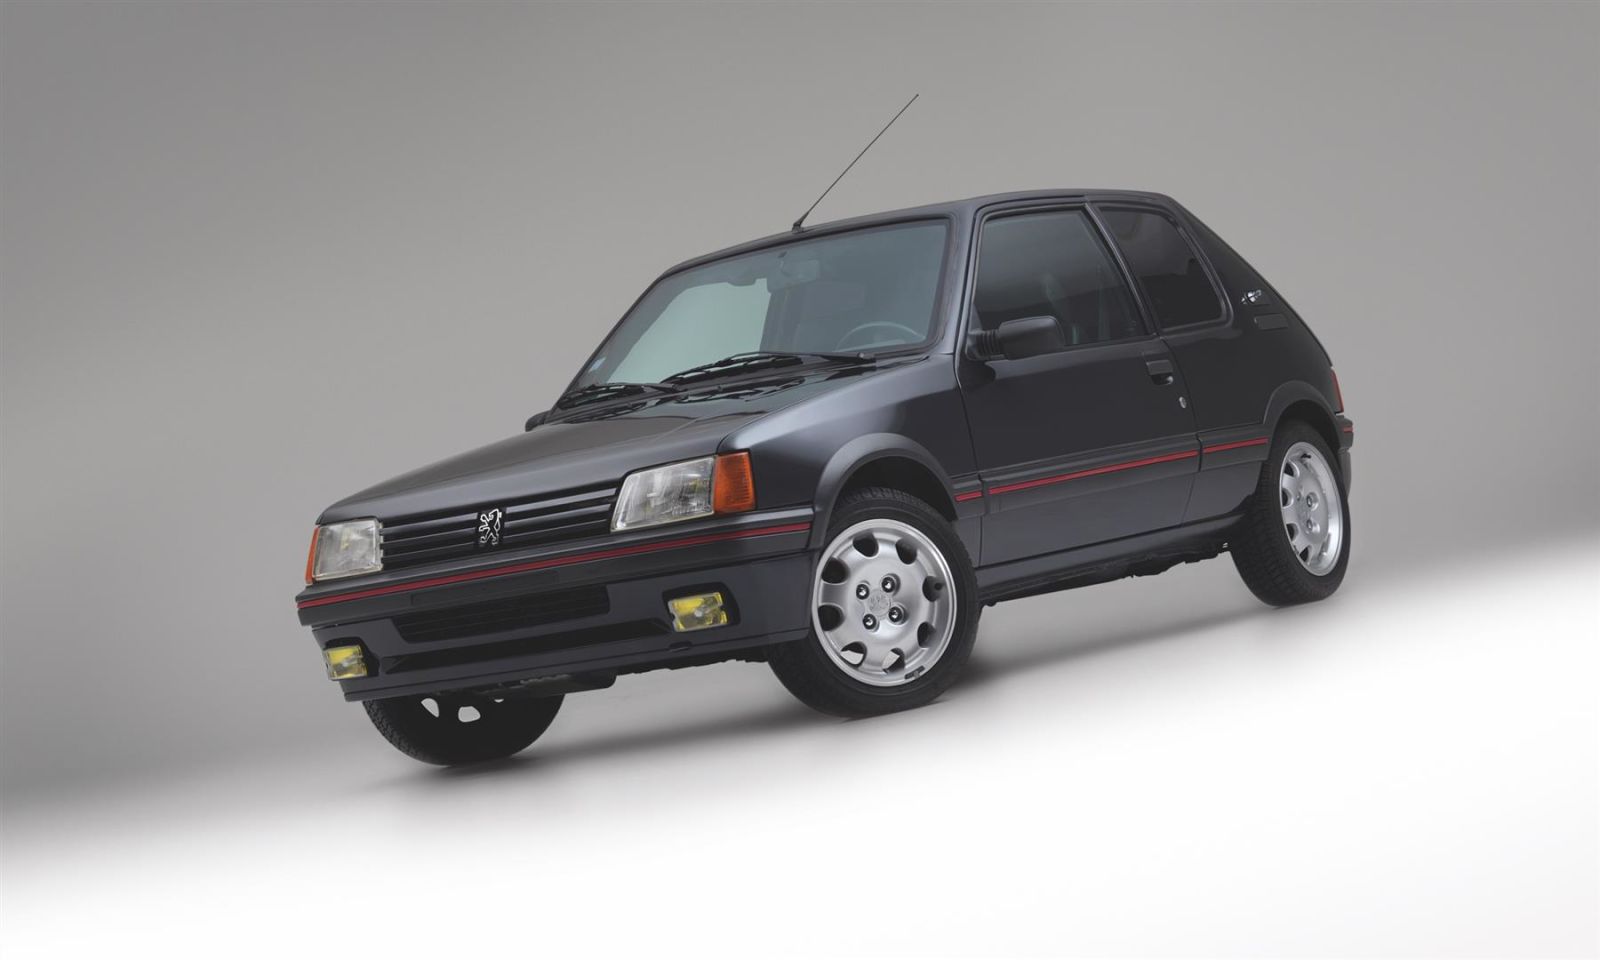 Illustration for article titled Heres an interesting car. Armoured Peugeot 205.